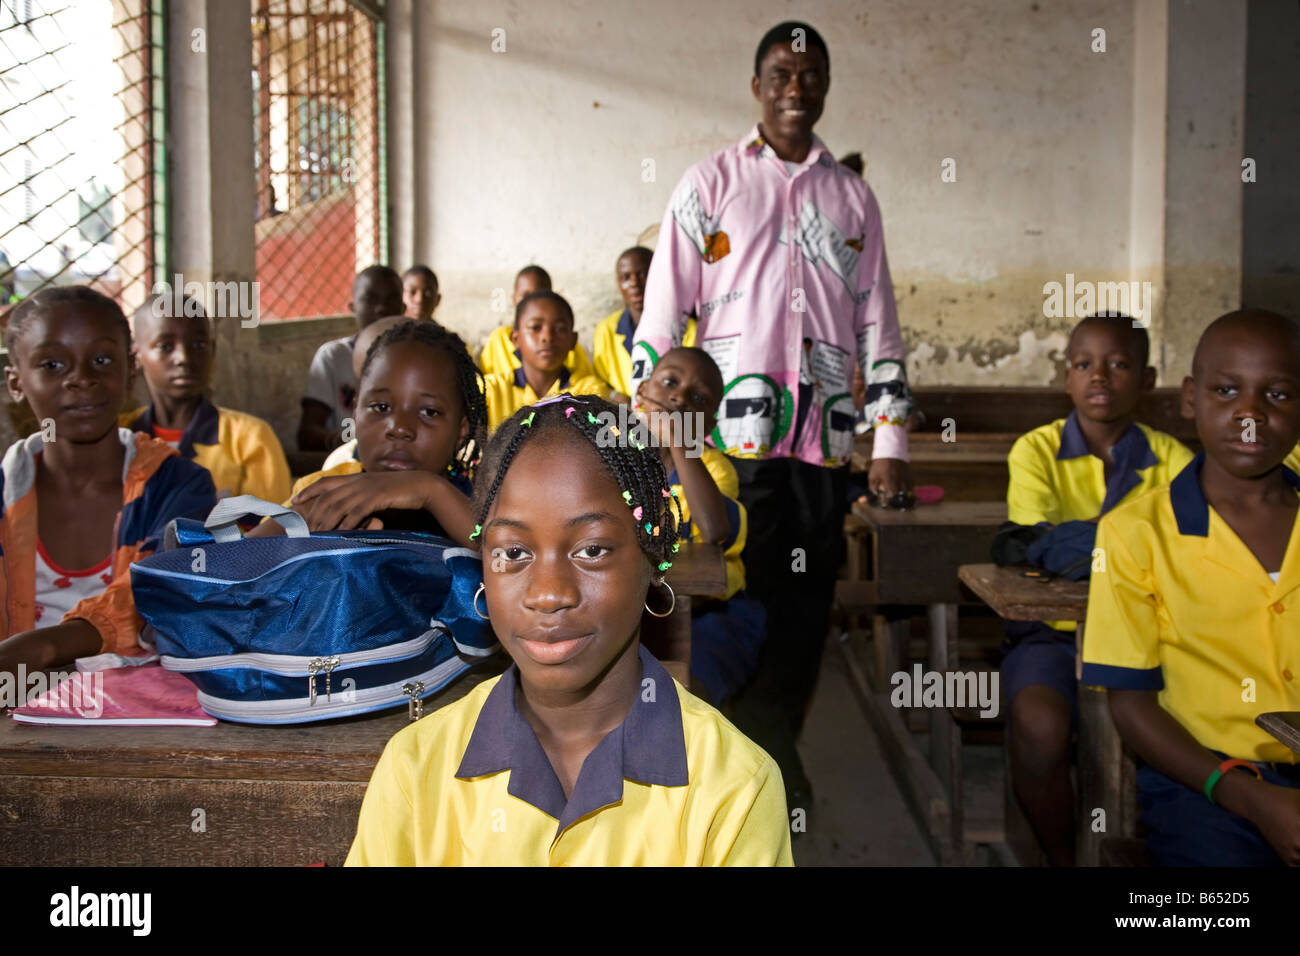 Students and teacher in school classroom, Douala, Cameroon, Africa Stock Photo